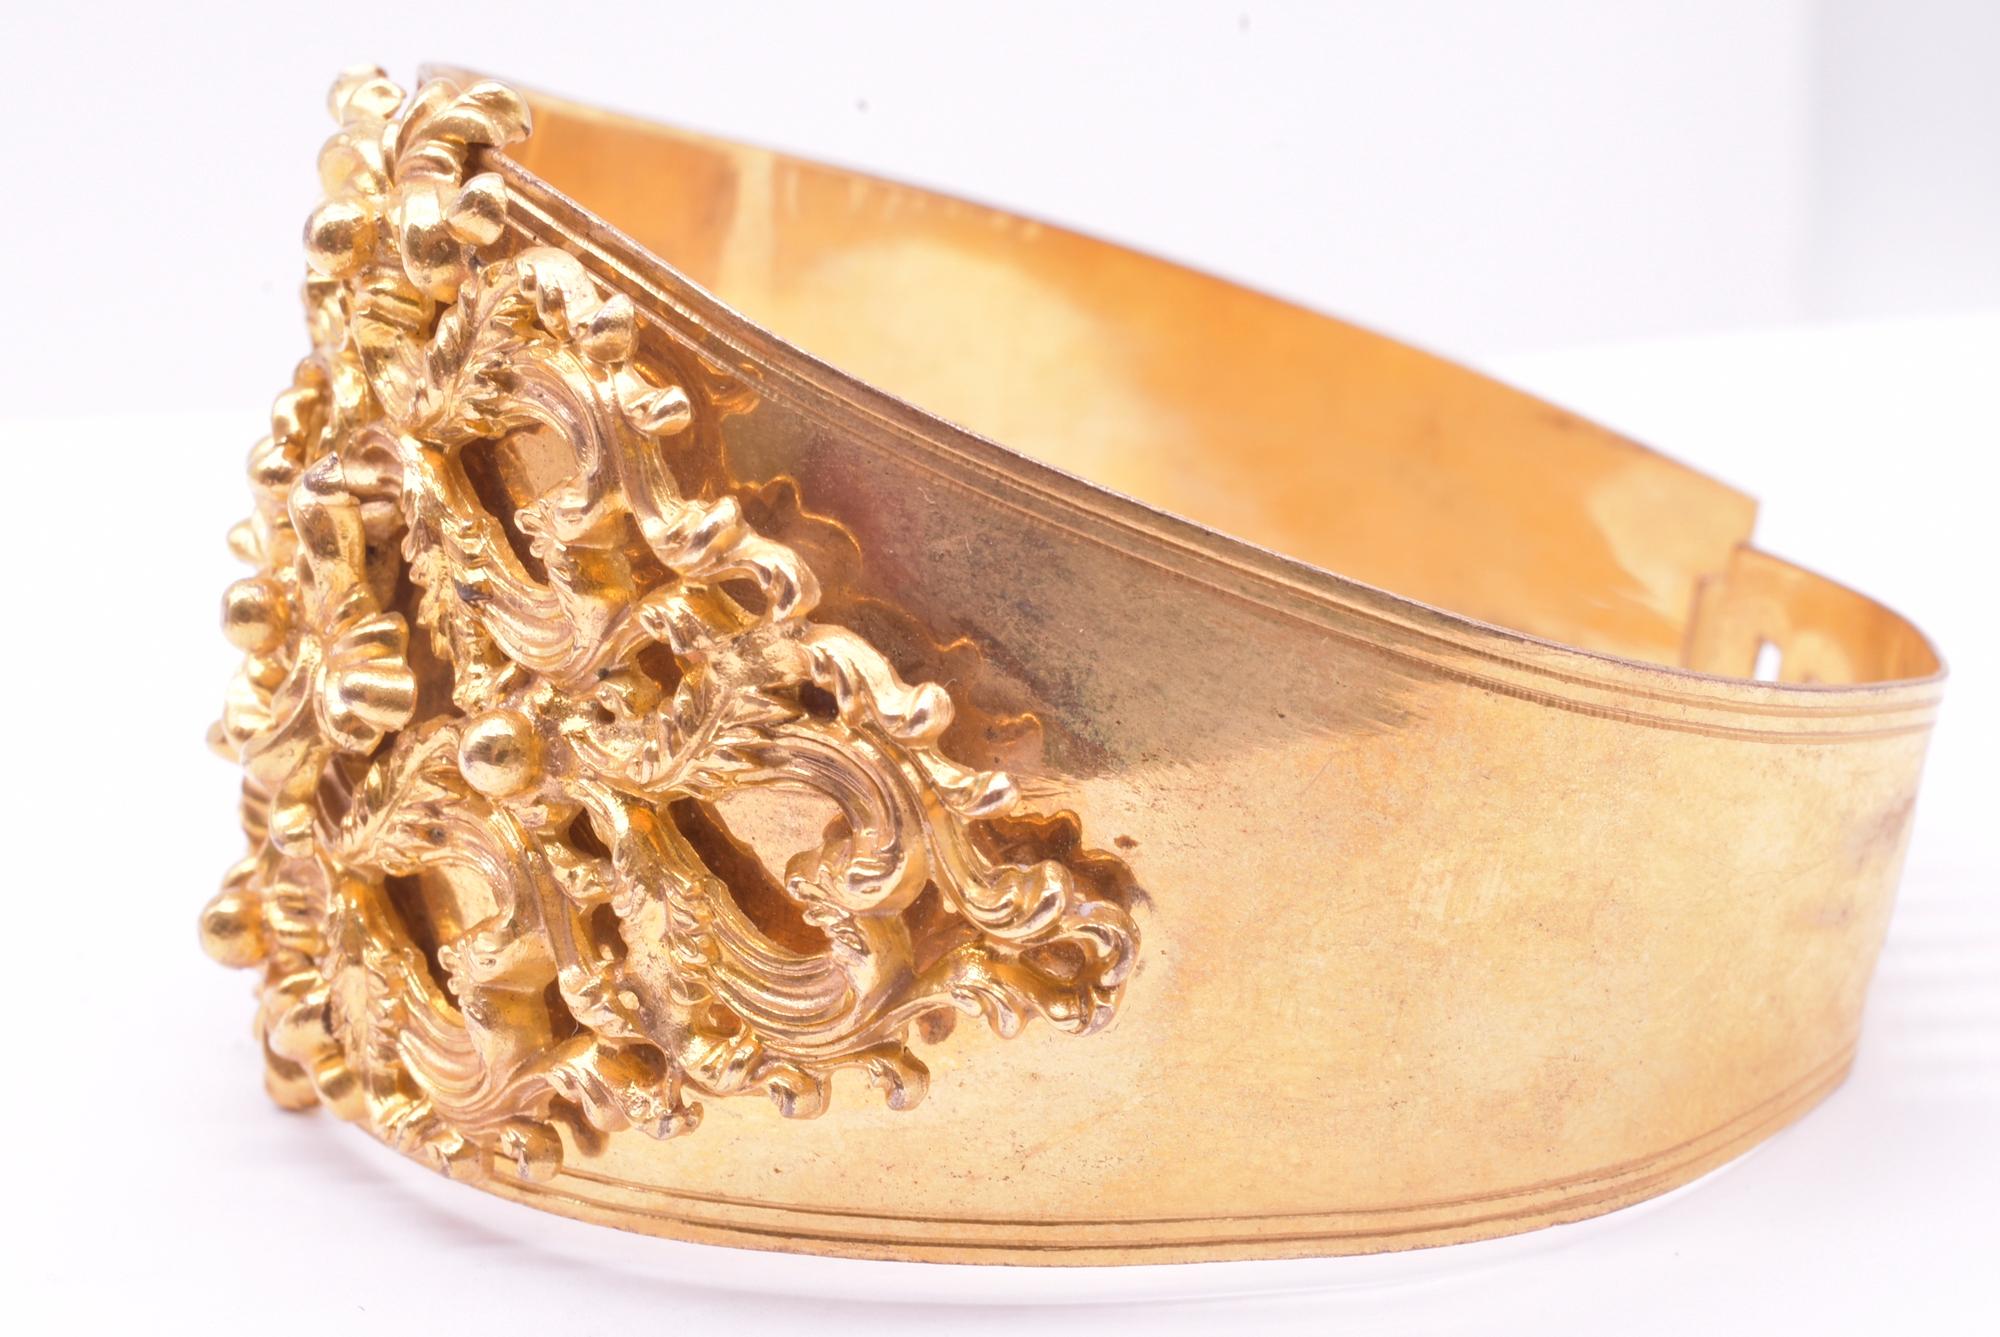 Dramatic metal Georgian cuff bracelet of rolled gold, with slots to adjust the sizing. With its fancy hand worked decorative baroque design bolted to the bracelet, this stylish cuff makes a substantial impact. Leave it to the Georgians to design